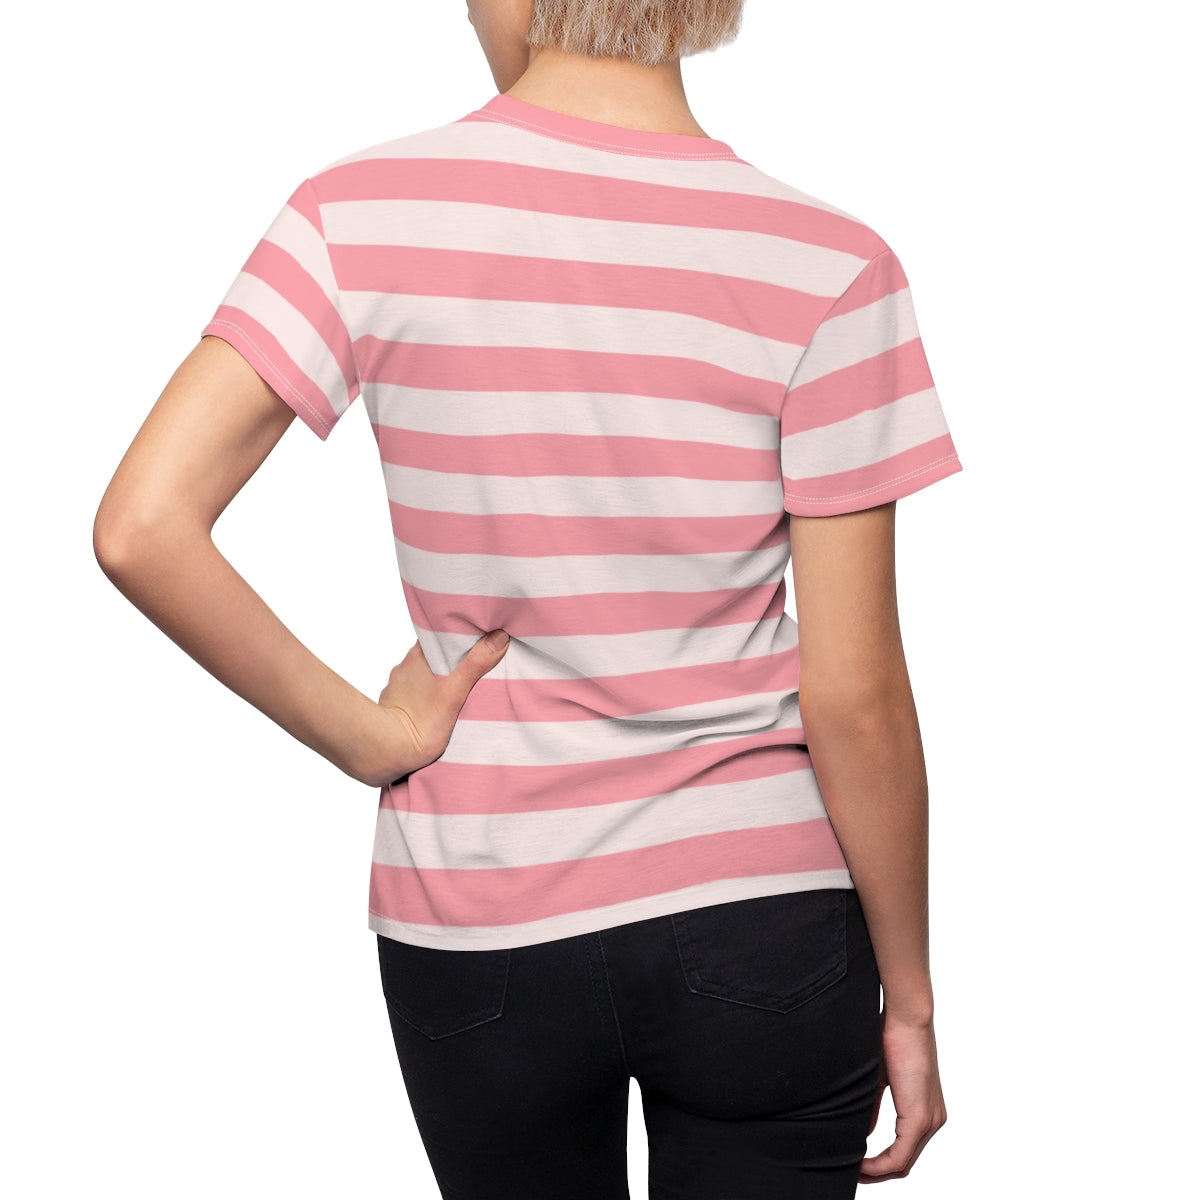 Pink and White Striped Women Tshirt, Ladies Vintage Retro Designer Adult Female Aesthetic Fashion Fitted Crewneck Tee Shirt Top Starcove Fashion